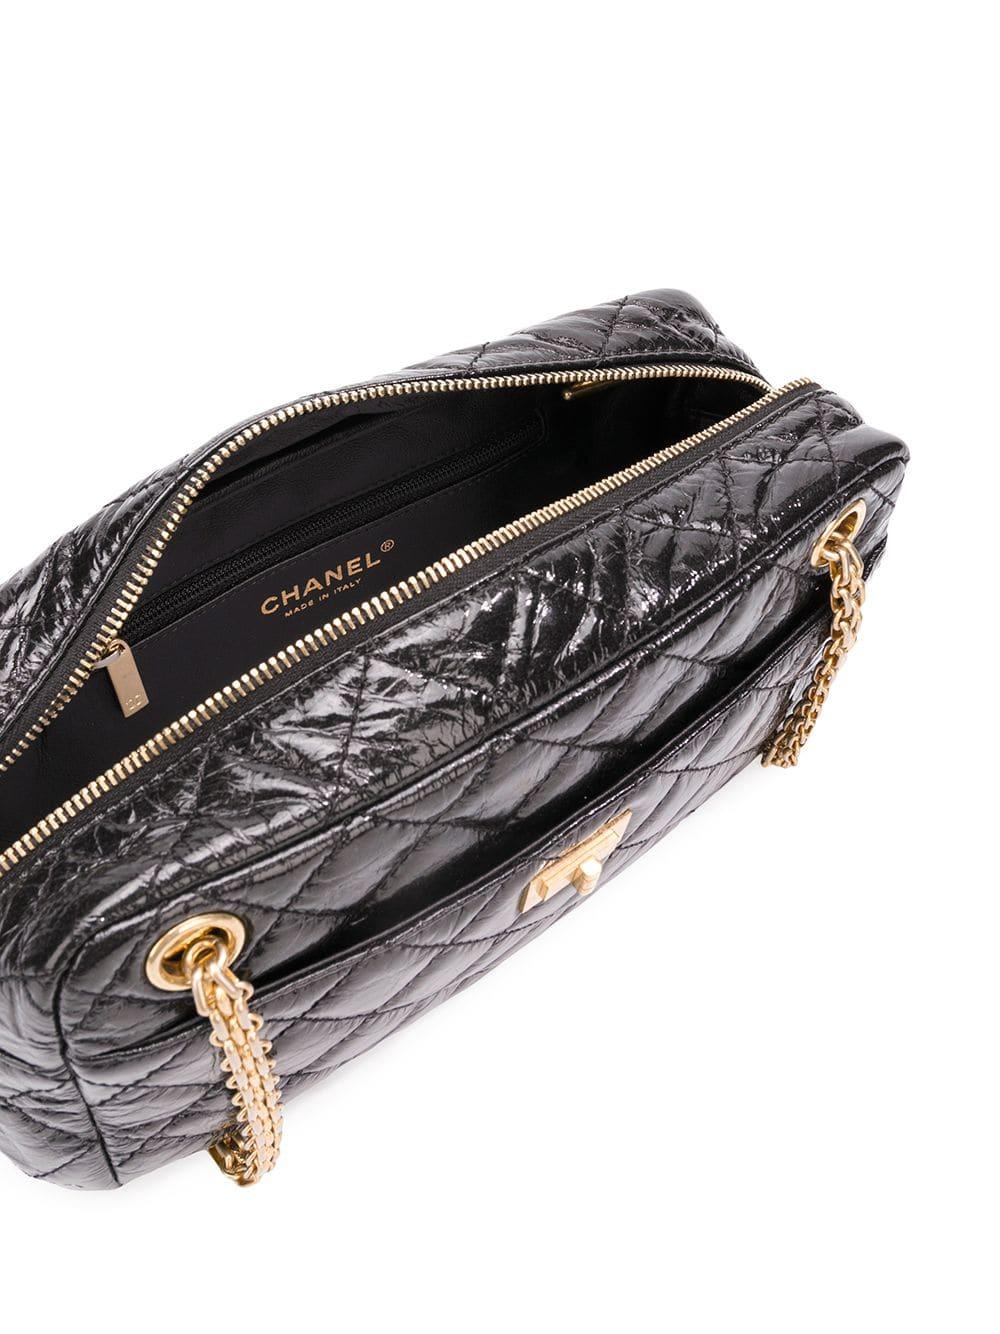 Crafted in black aged and distressed calfskin leather, this timeless camera case by Chanel features a distinctive quilted design and patent finish, two gold-tone mademoiselle chain shoulder straps and the turn lock fastening designed by Coco Chanel